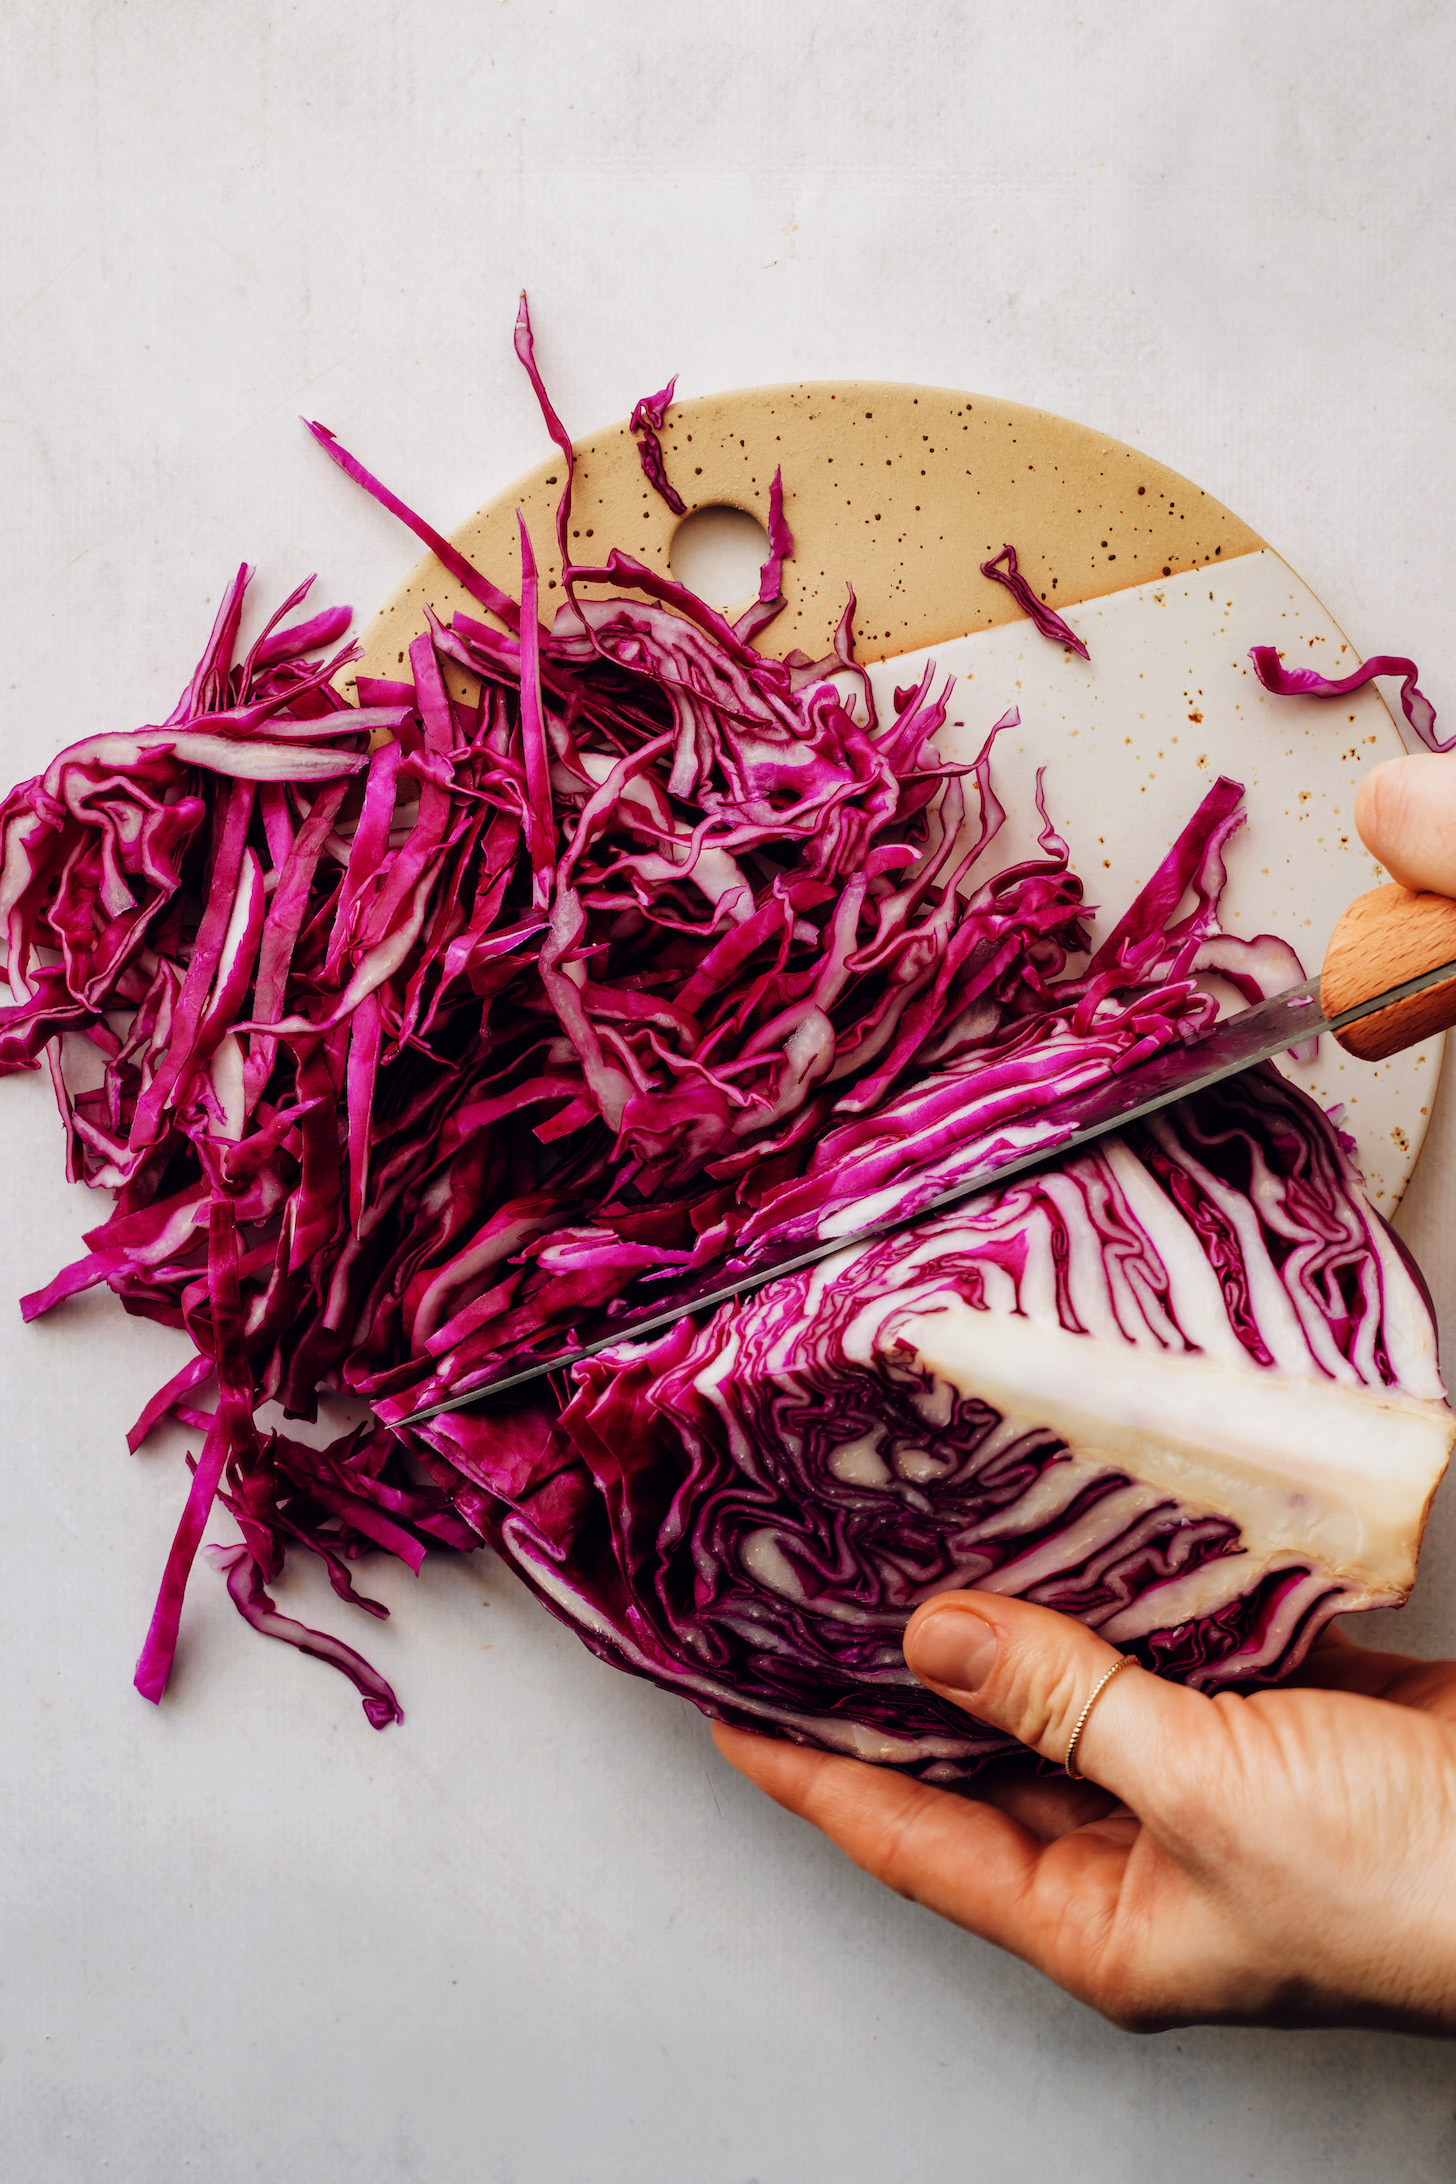 Using a large knife to slice red cabbage